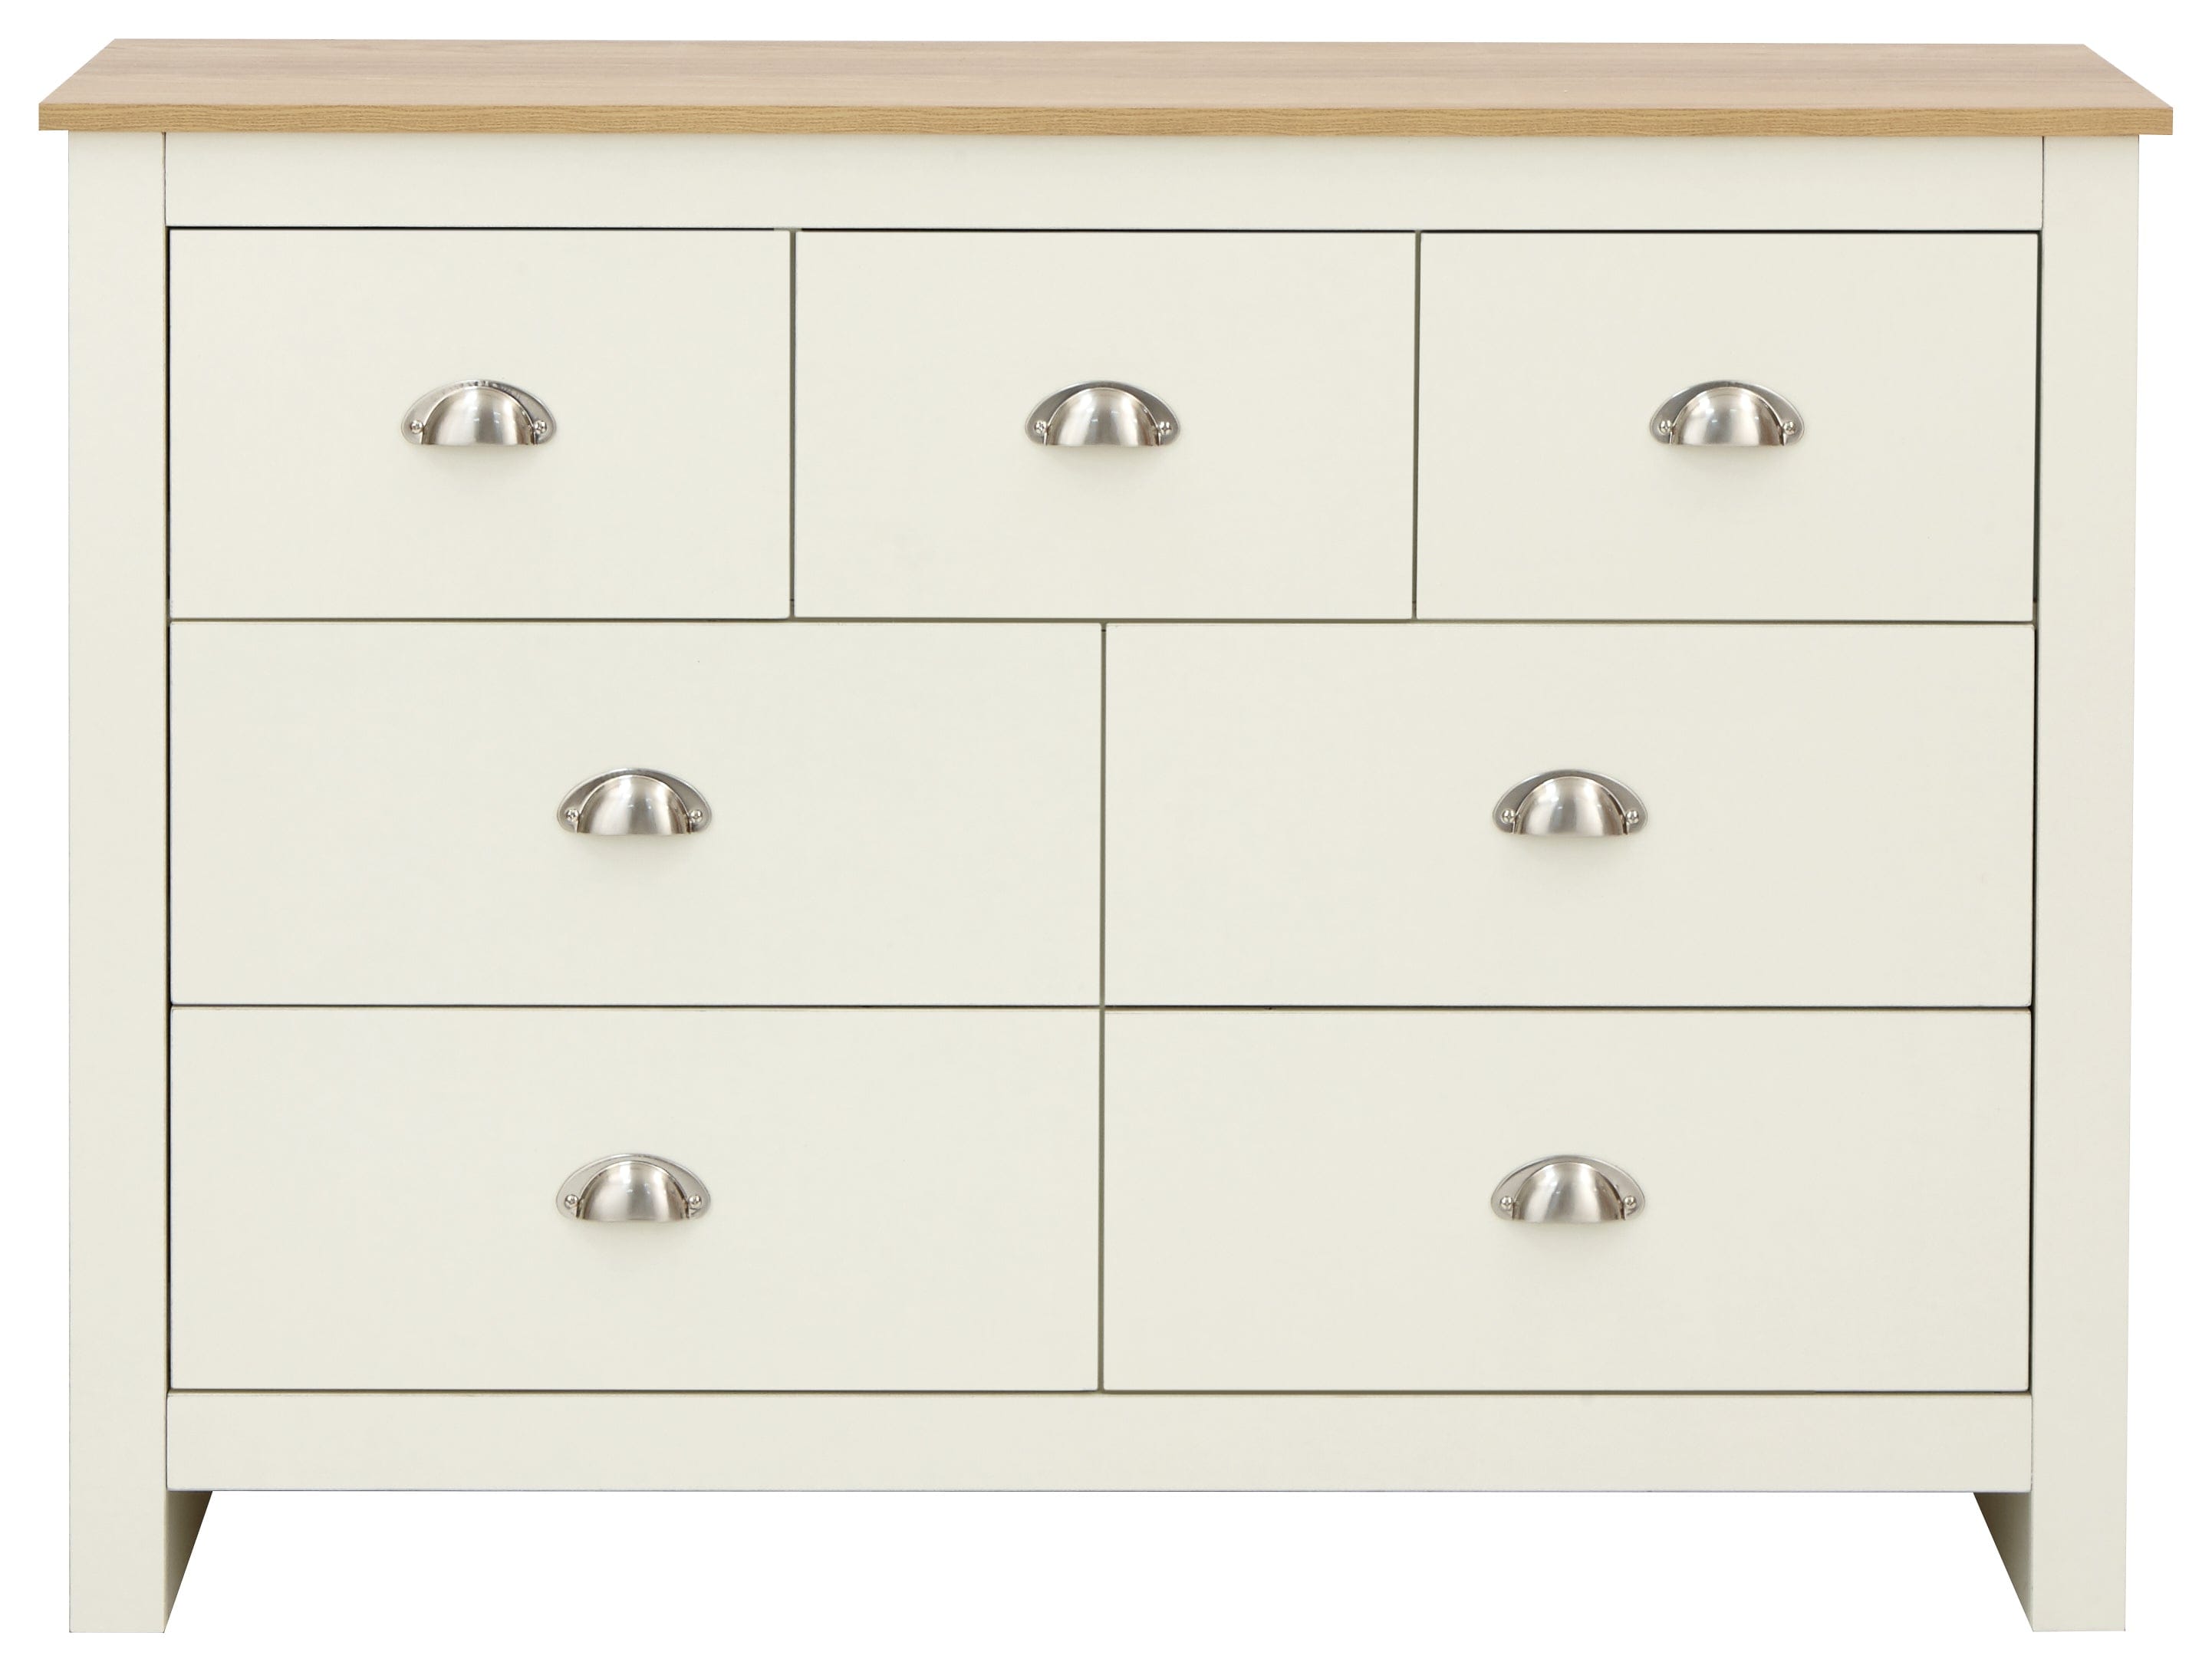 GFW Chest Of Drawers Lancaster Merchants Chest Cream Bed Kings